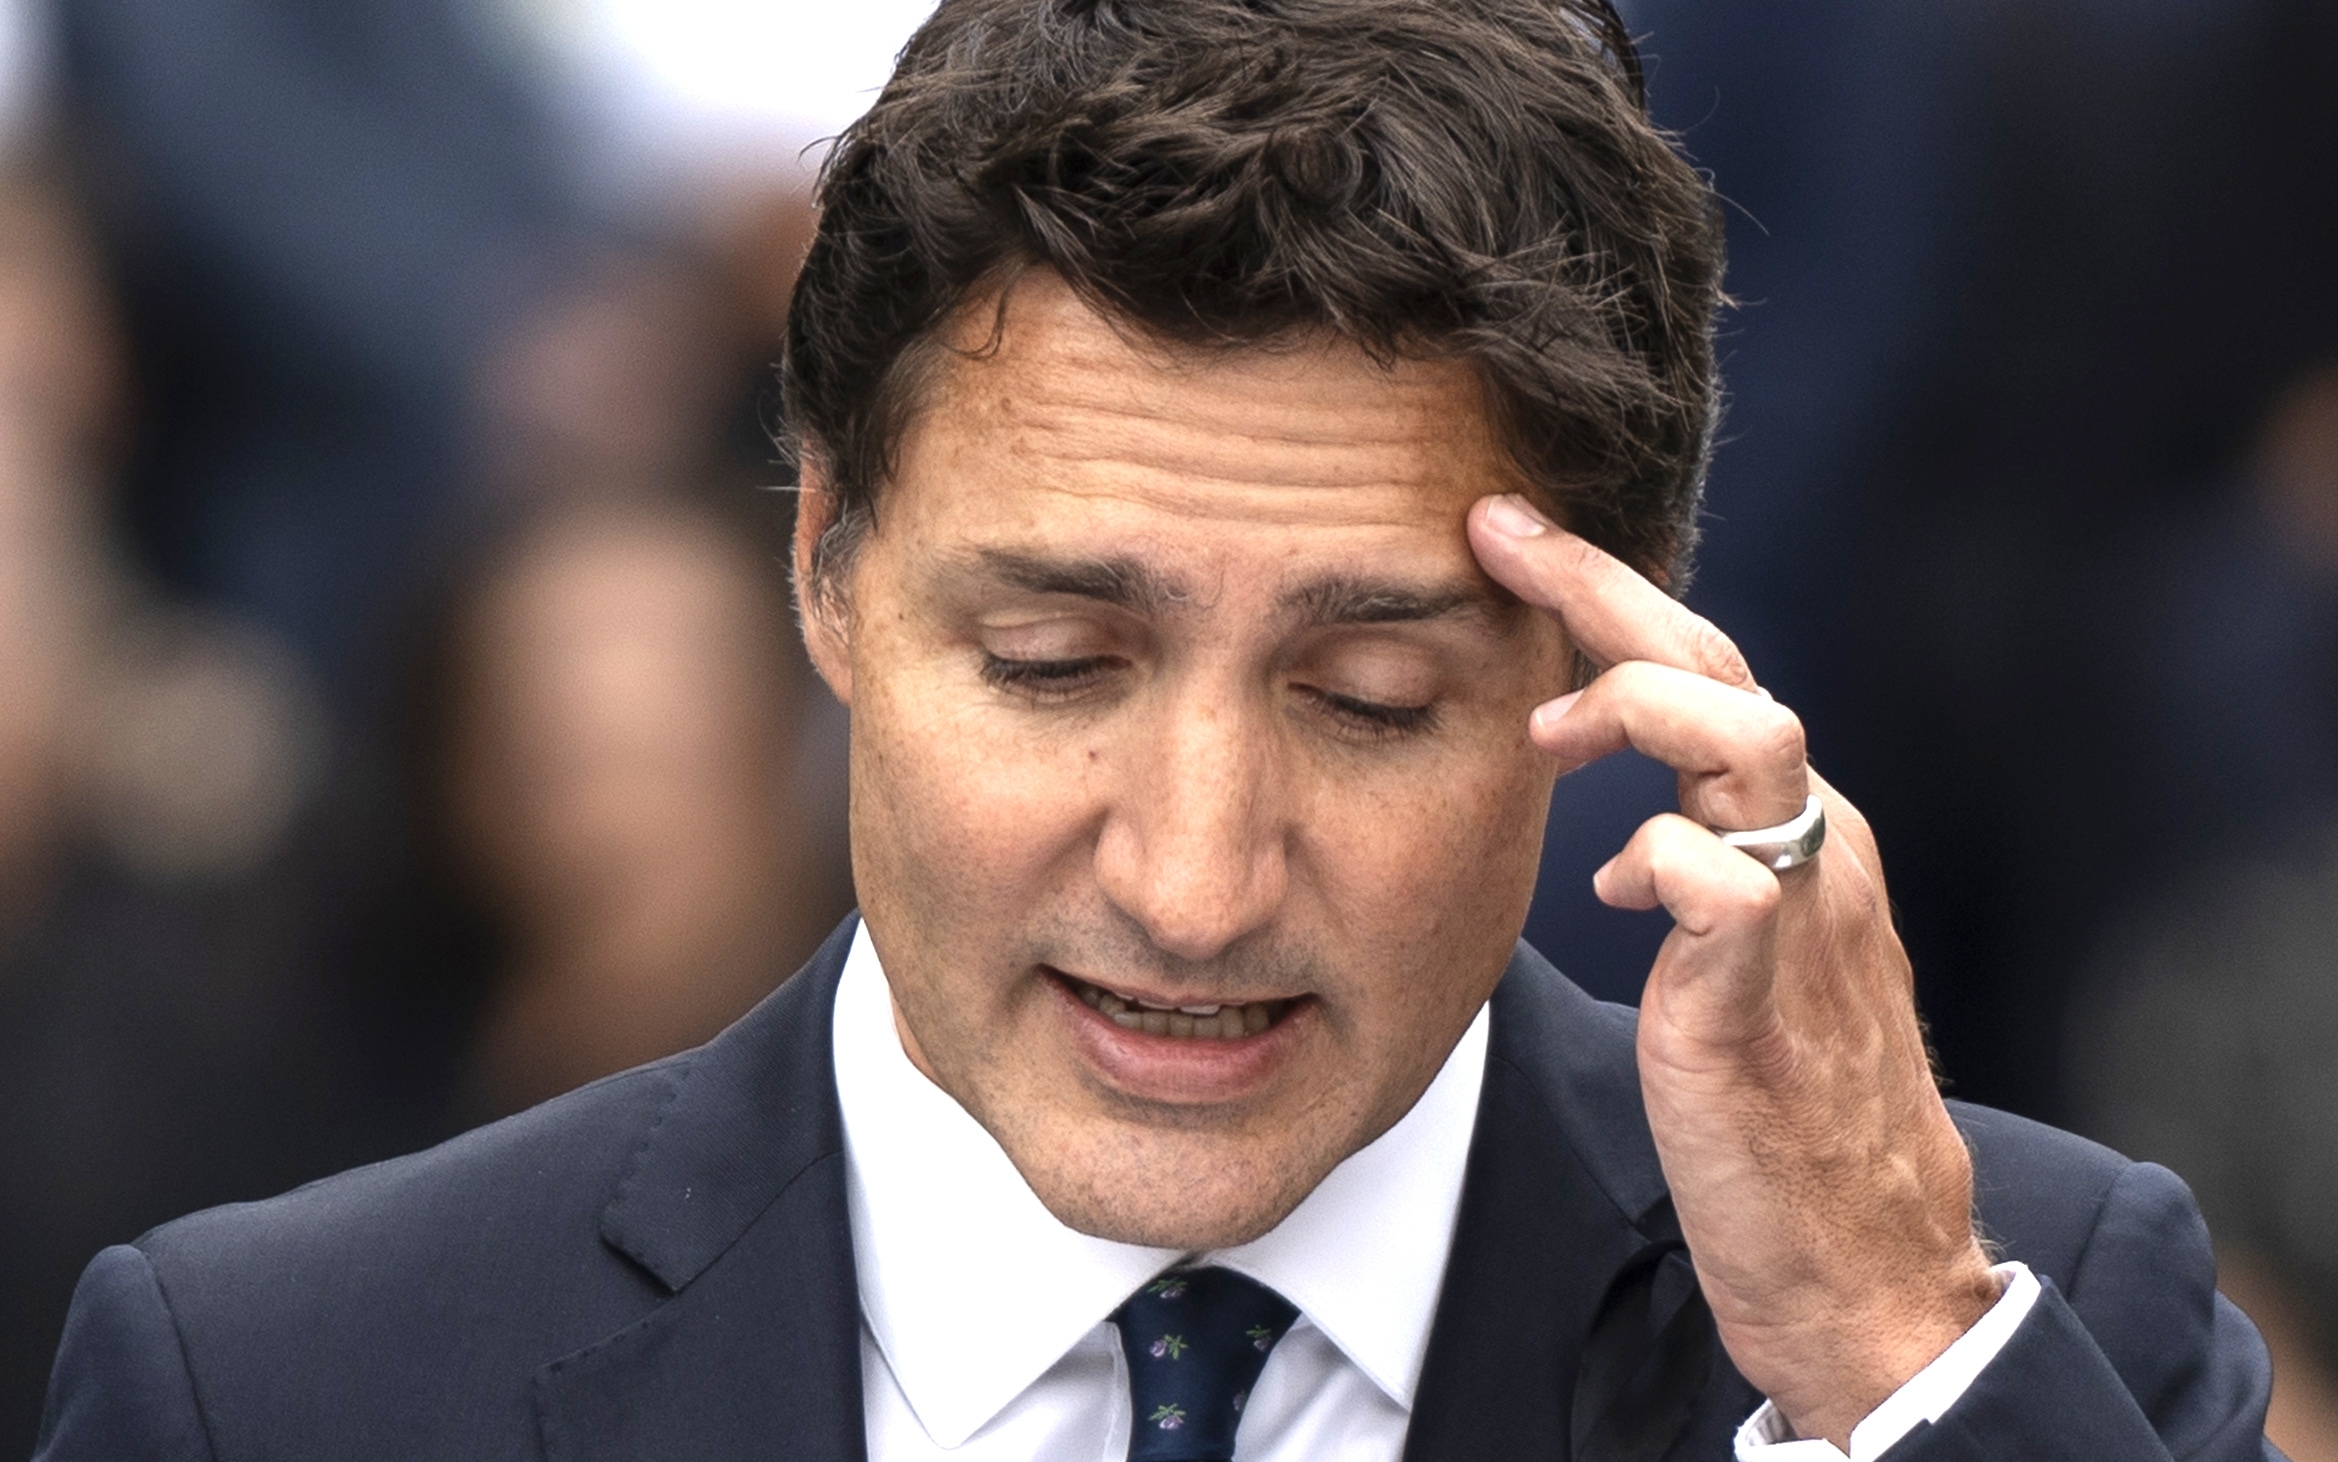 LILLEY: Liberals dismiss the very real #TrudeauMustGo campaign